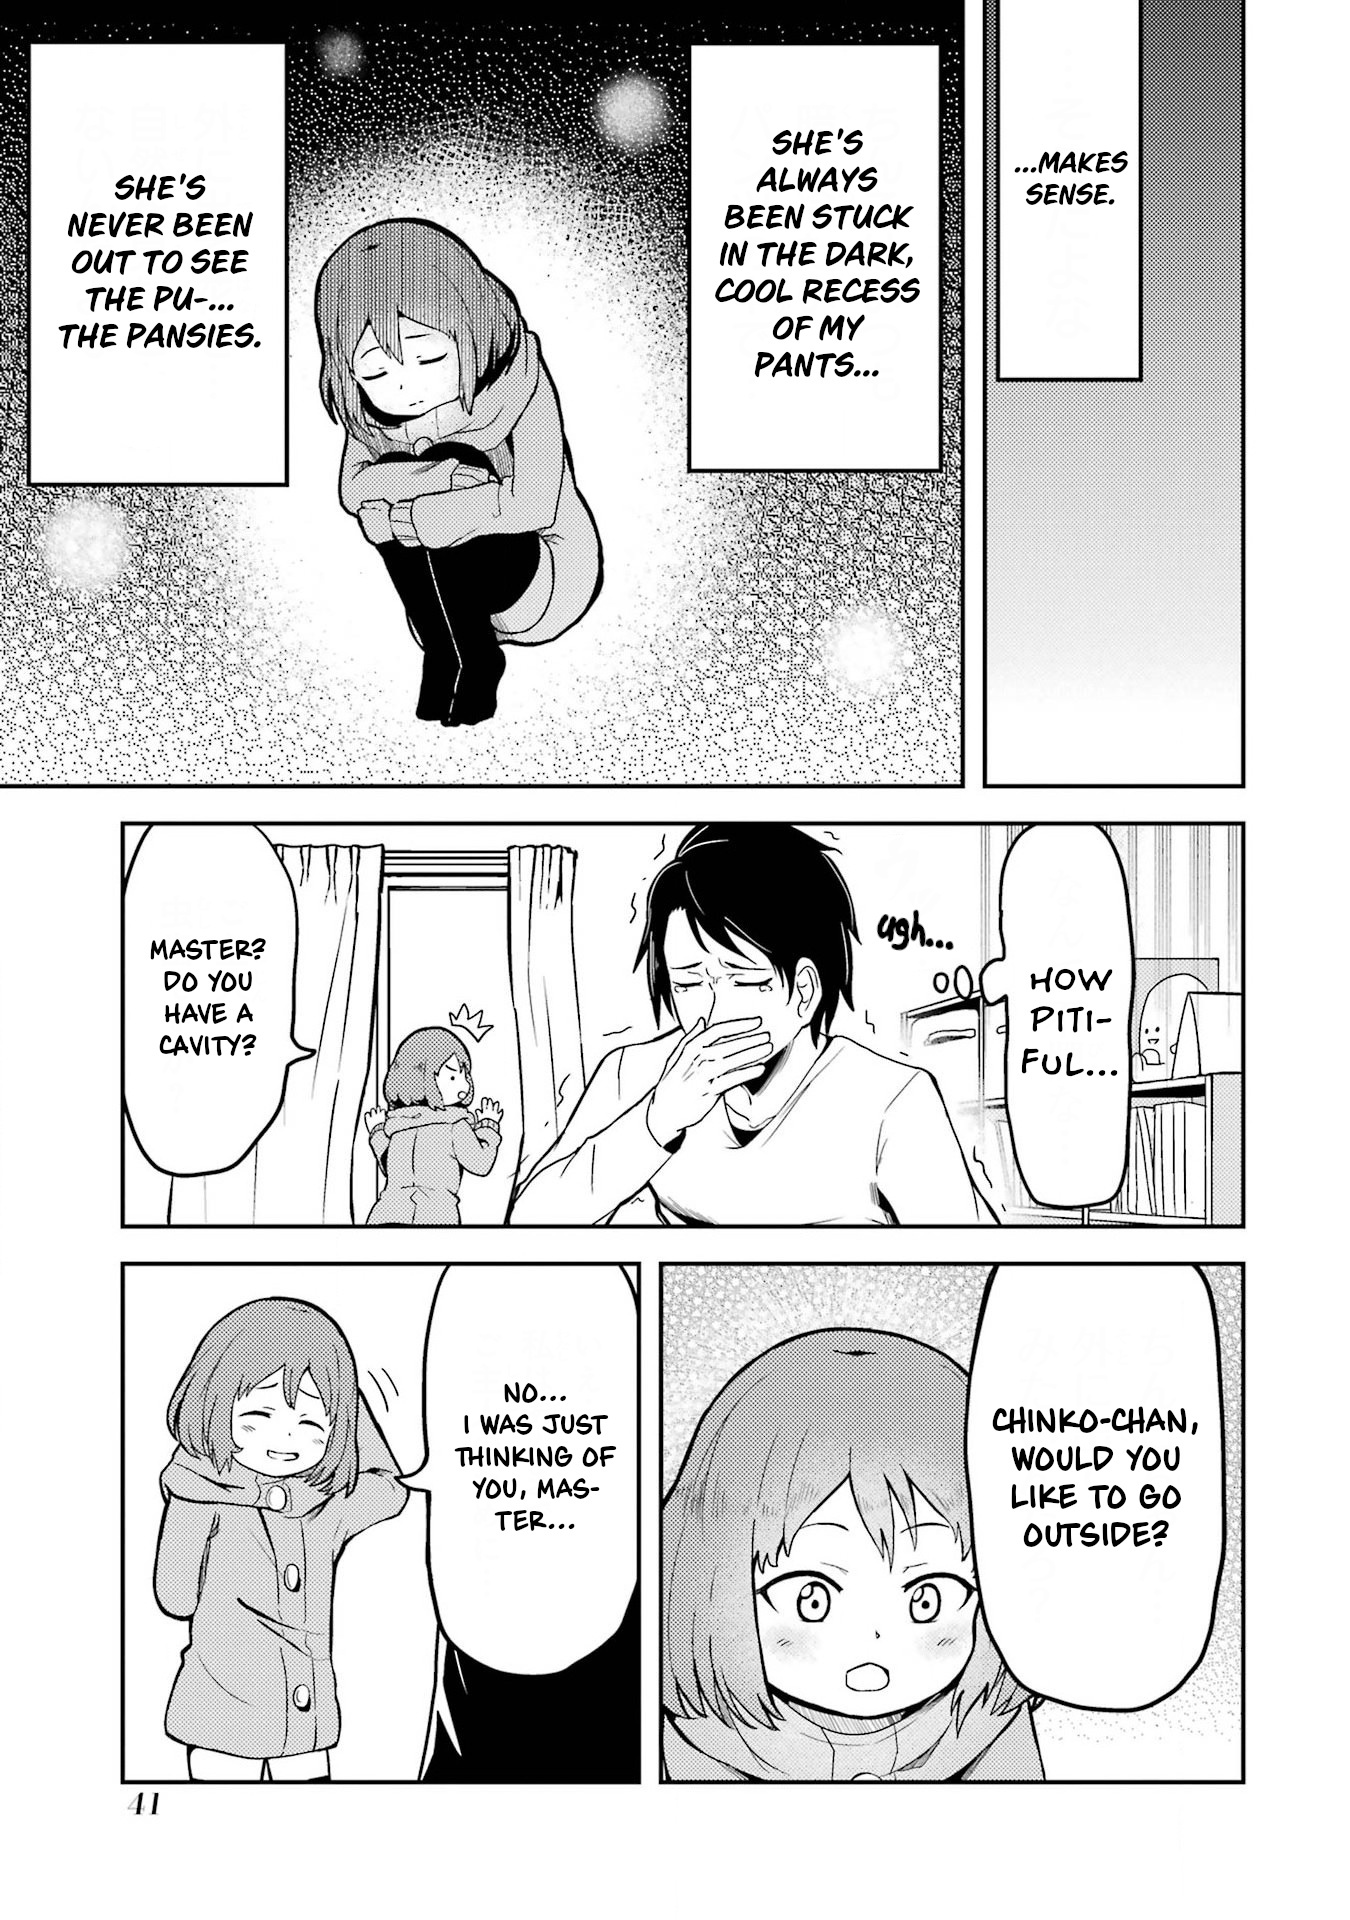 Turns Out My Dick Was A Cute Girl Vol.1 Chapter 3: The Dick That Goes Outside. - Picture 3